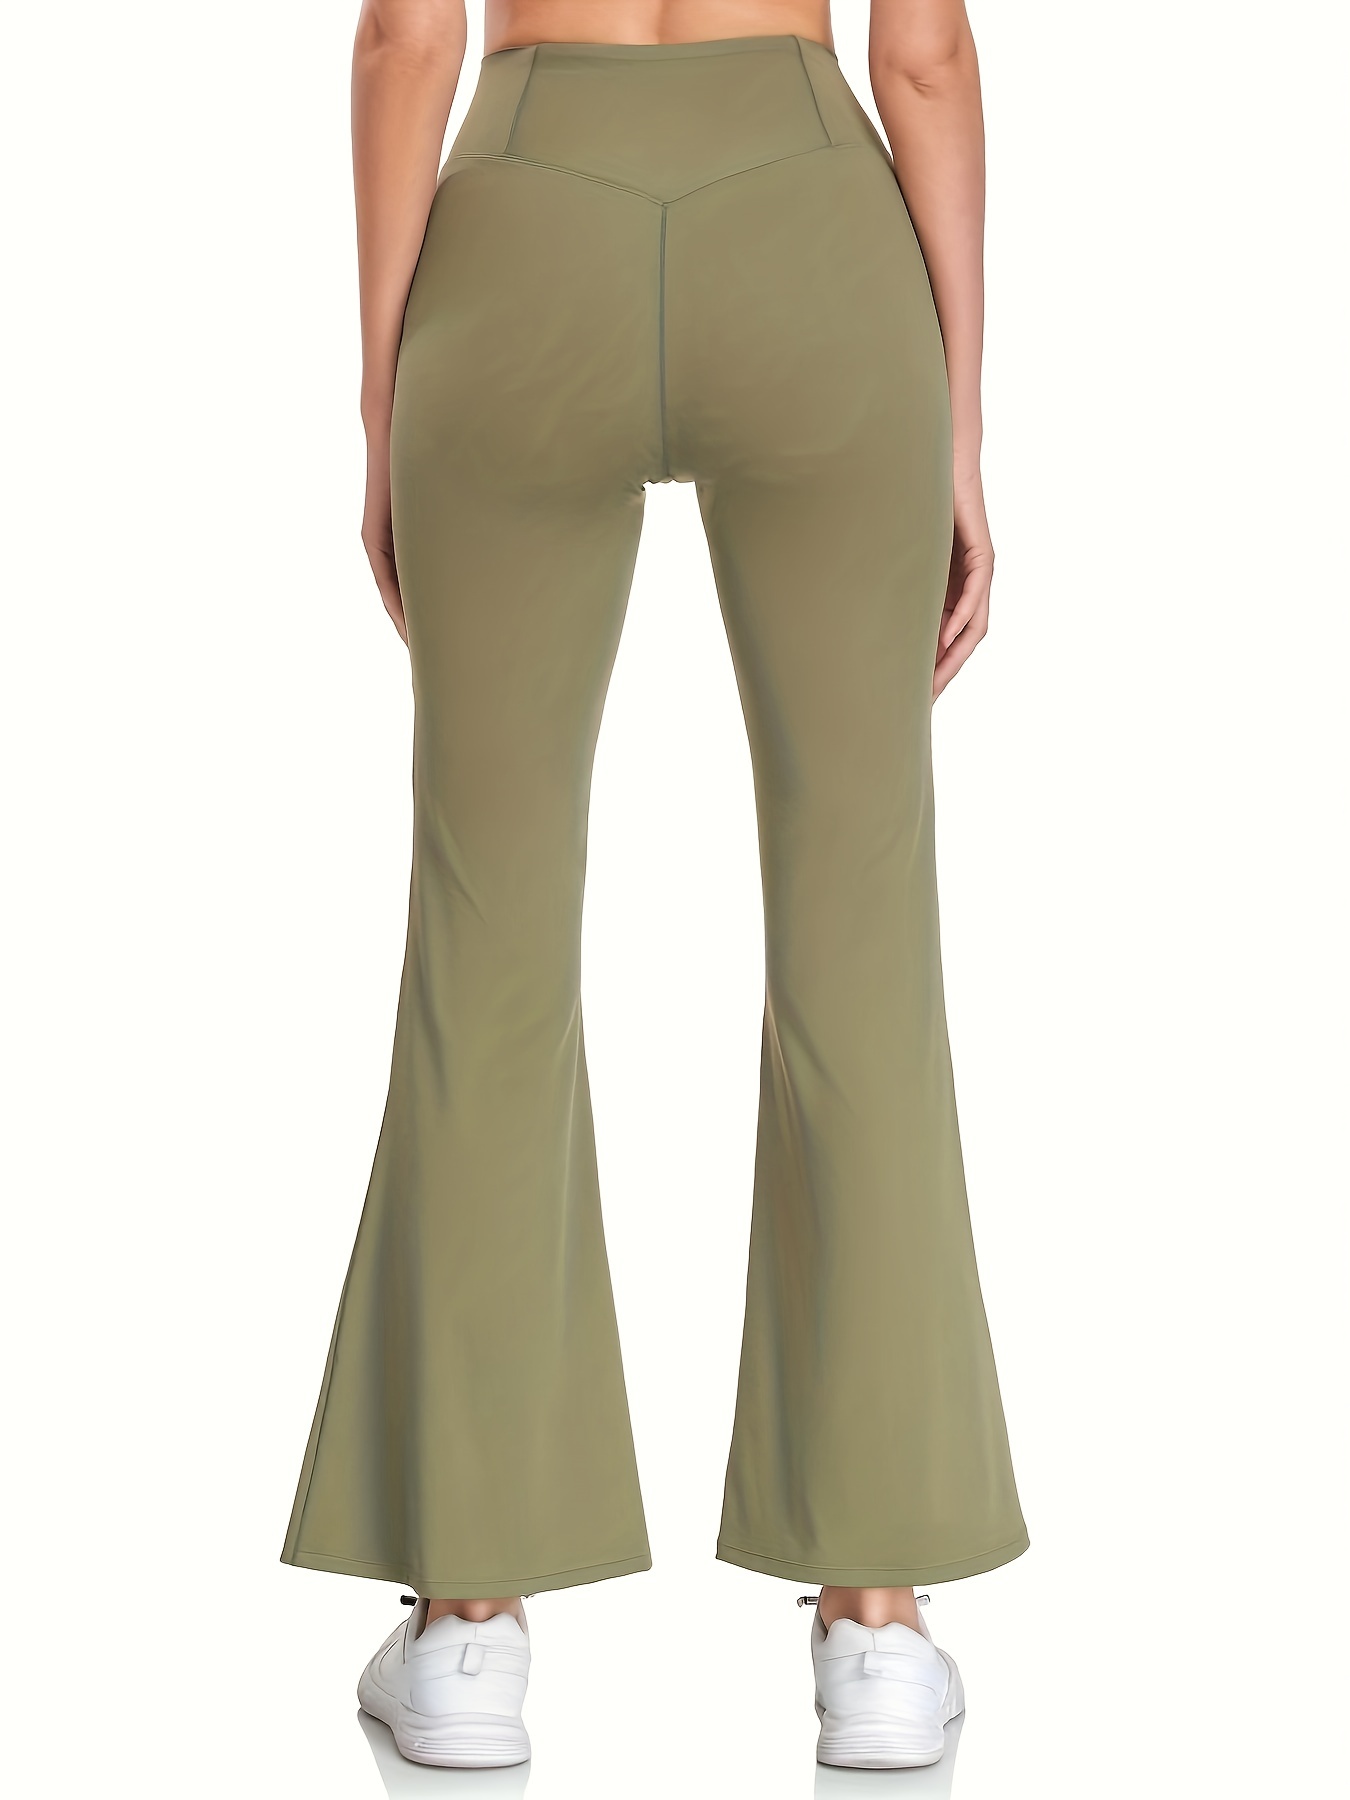 Bell Bottom Pants for Women High Waisted Pure Color Lounge